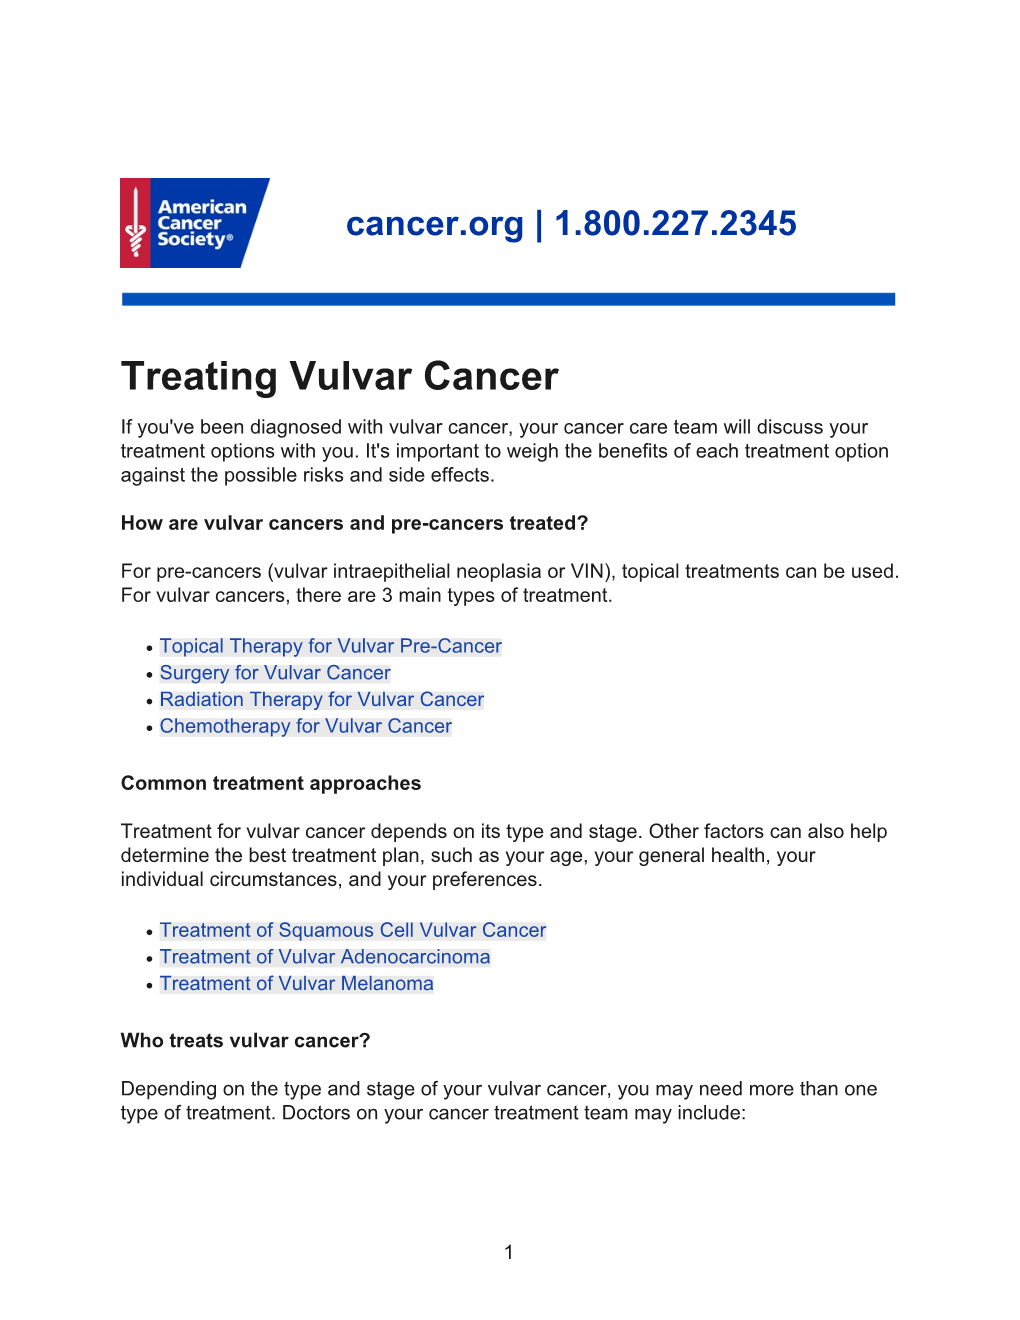 Treating Vulvar Cancer If You've Been Diagnosed with Vulvar Cancer, Your Cancer Care Team Will Discuss Your Treatment Options with You